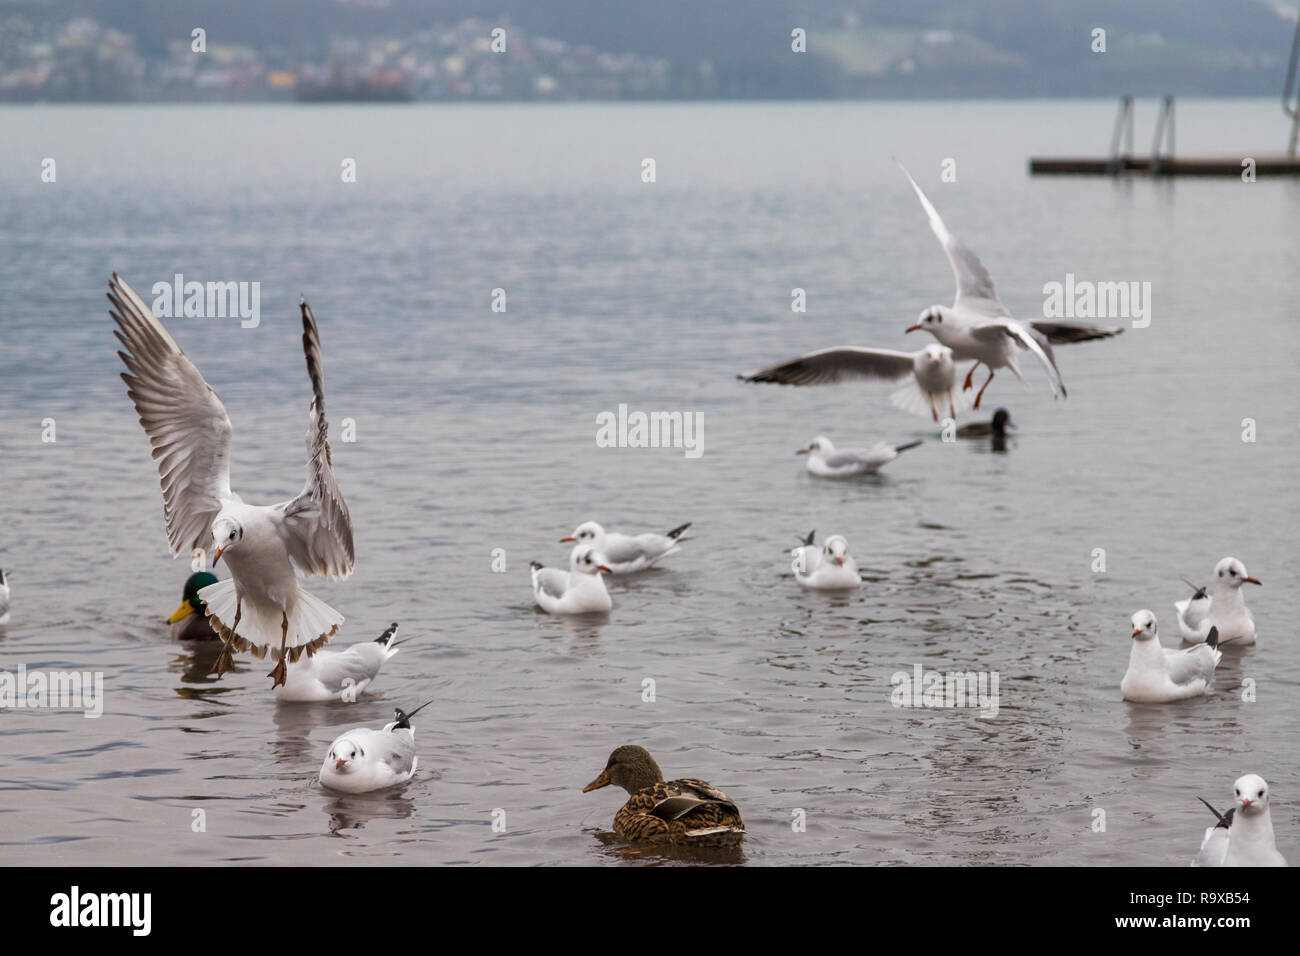 While feeding the ducks, seagulls are competing and fighting among one another for food. Stock Photo